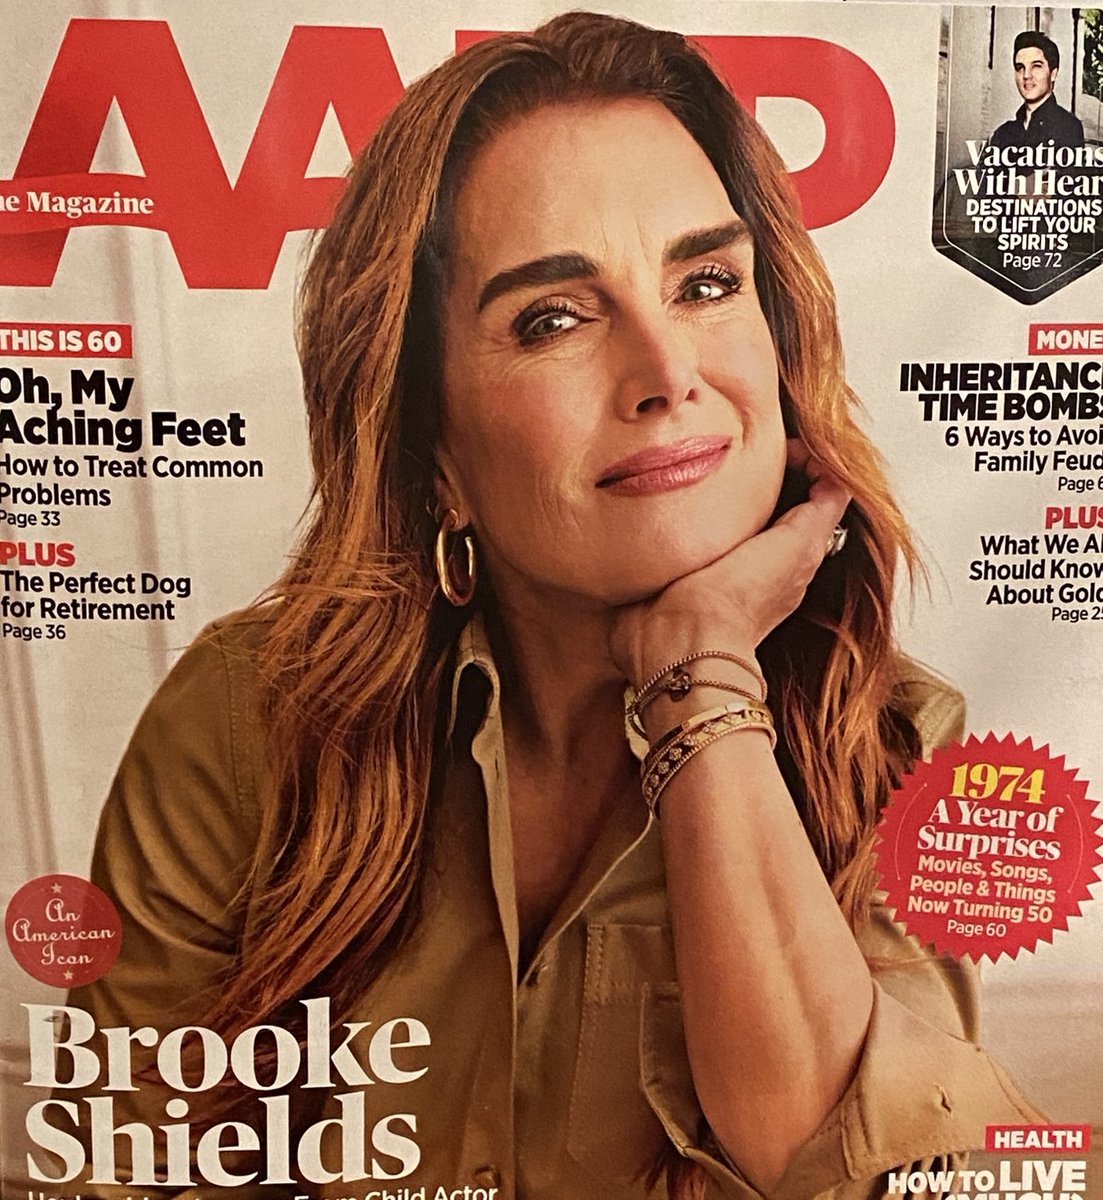 Never thought I would see the day 
Brooke Shields on the AARP cover.
#ChildhoodCrush